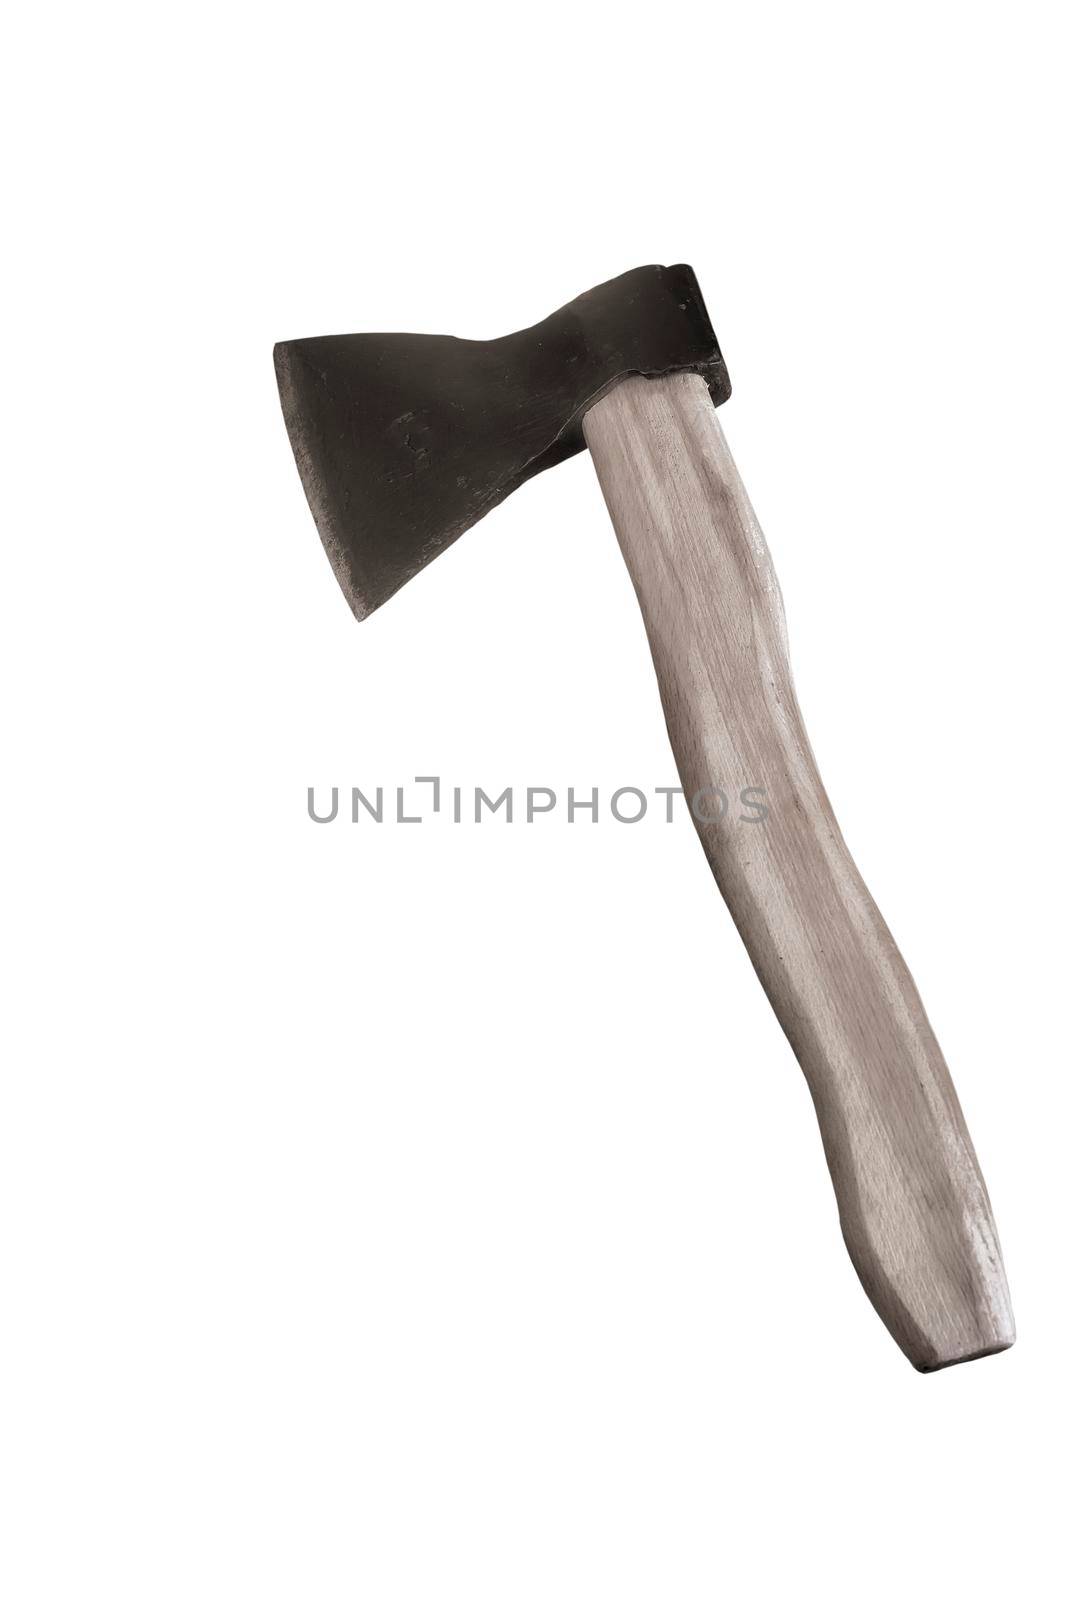 An axe with a wooden handle on a white background. by georgina198